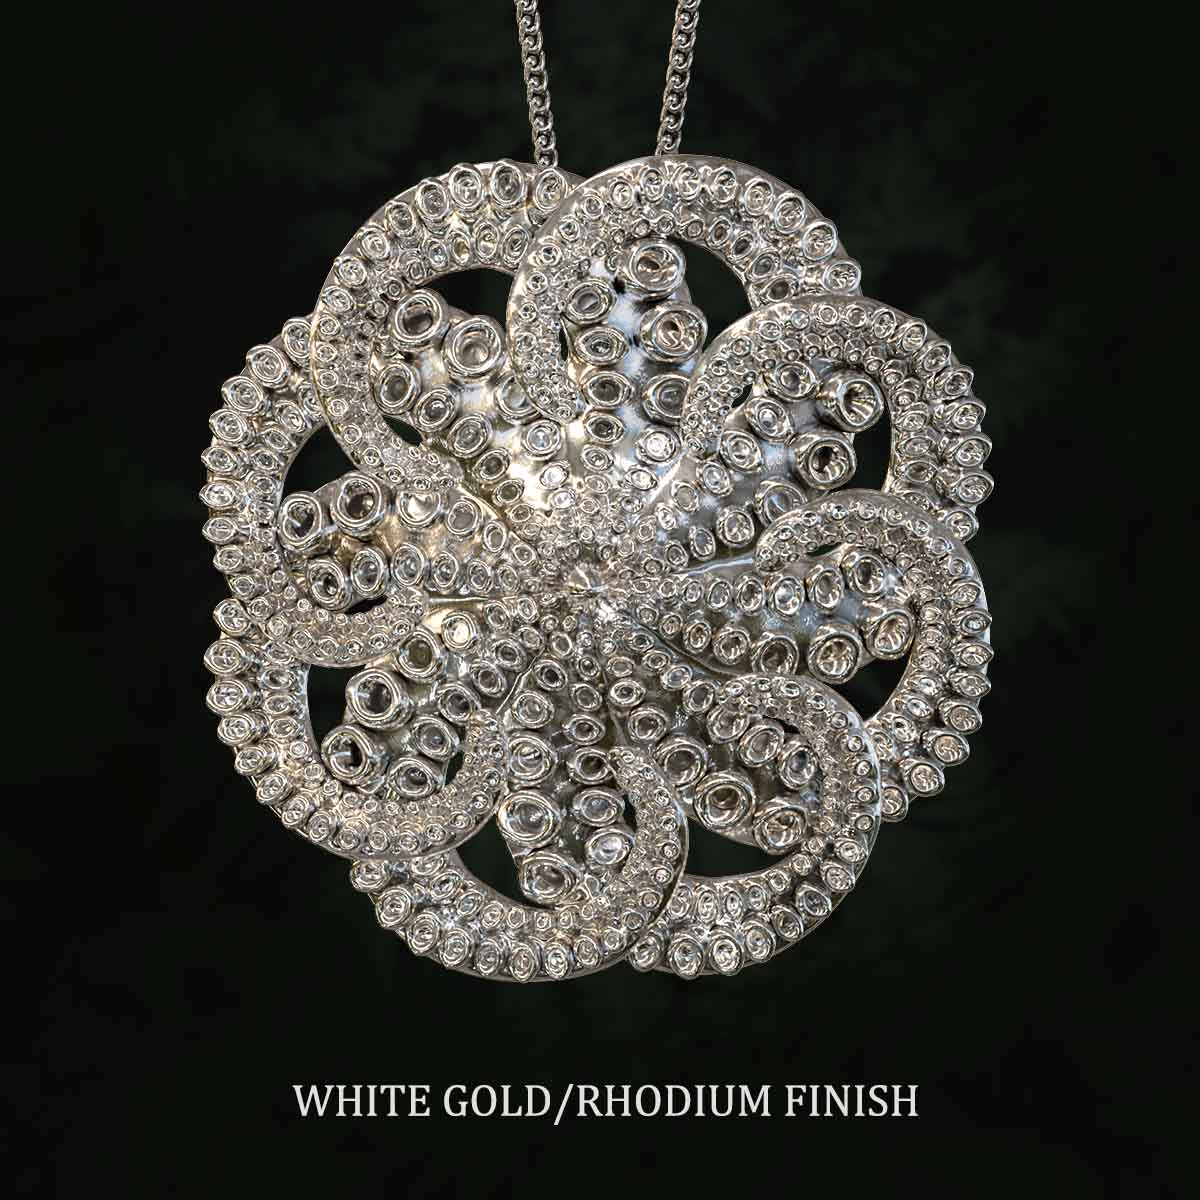 White-Gold-Rhodium-Finish-OctopusFlower-Pendant-Jewelry-For-Necklace